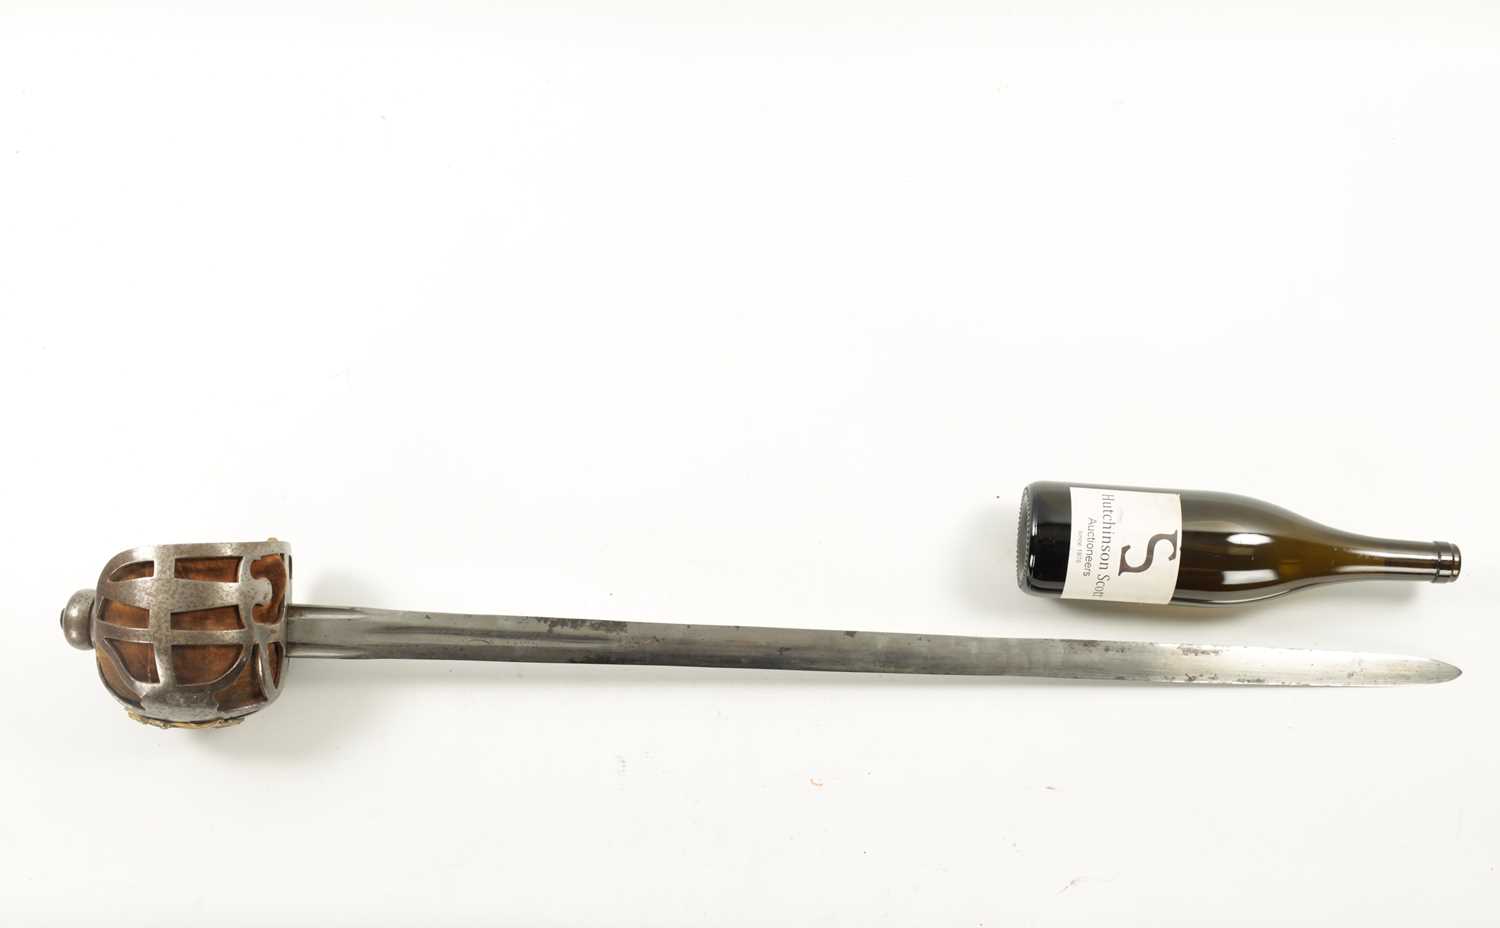 A RARE MID 18TH CENTURY SCOTTISH BASKET-HILTED BROADSWORD - Image 7 of 16